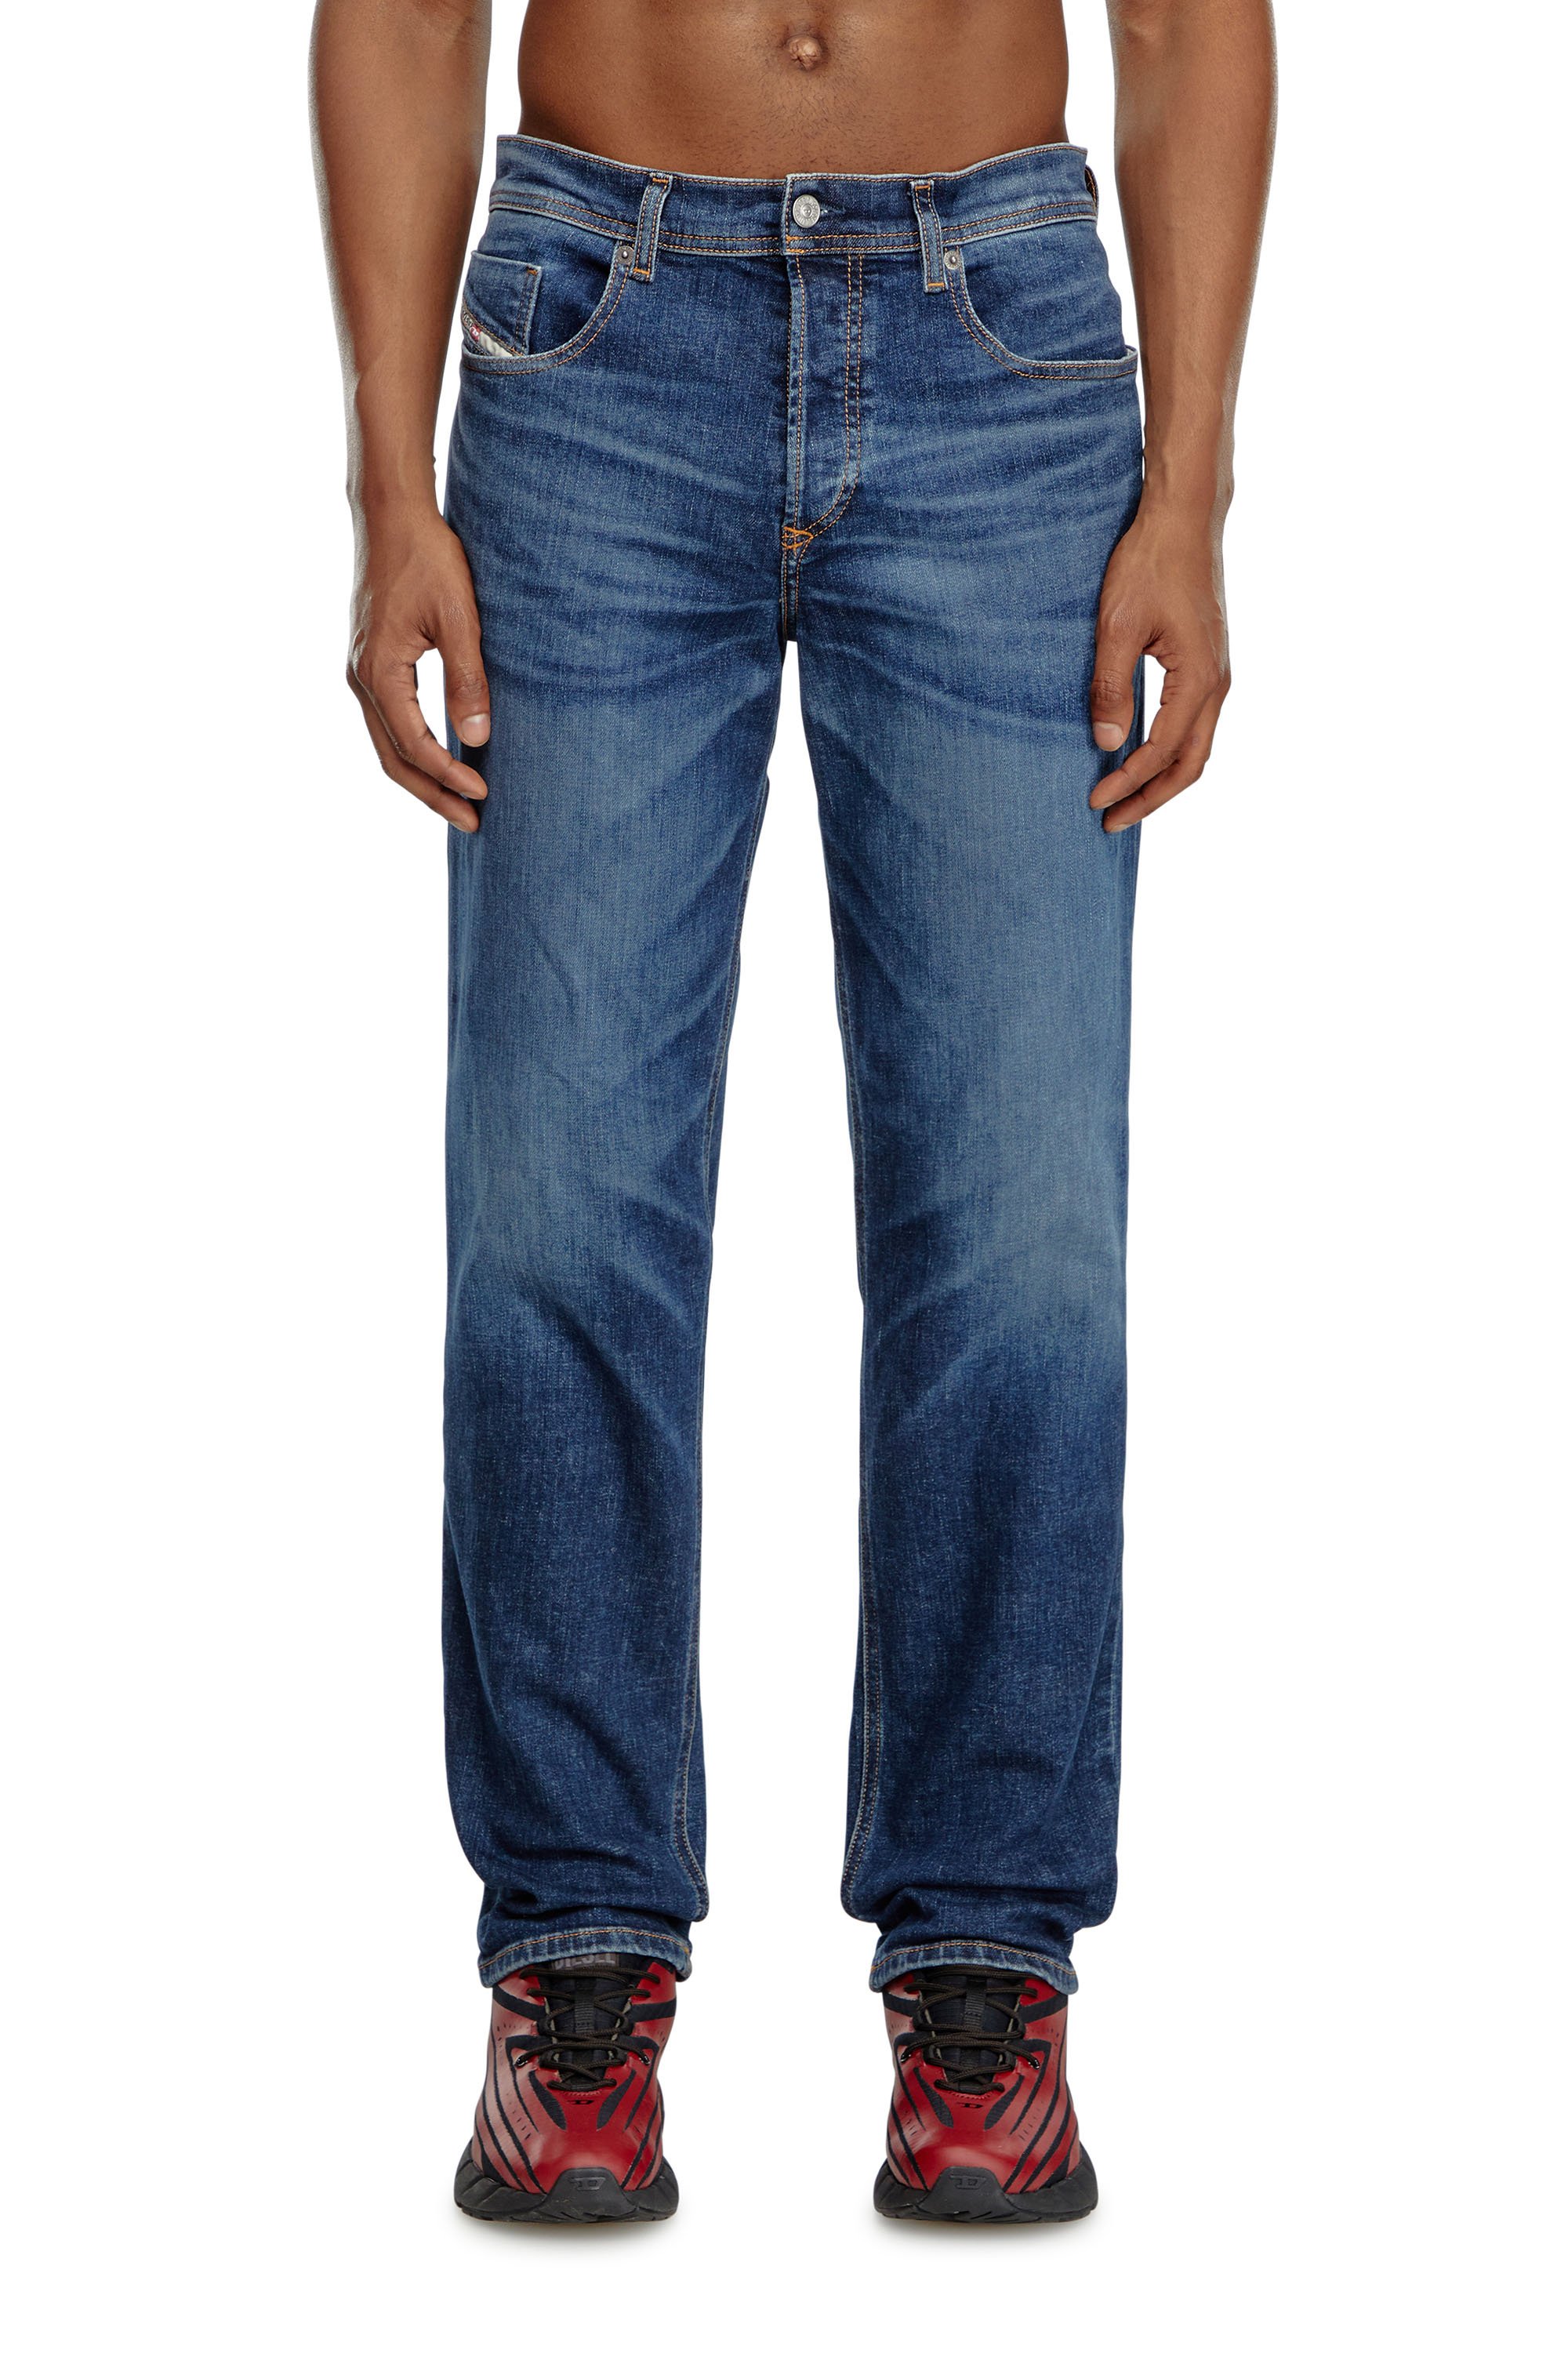 Diesel - Tapered Jeans 2023 D-Finitive 09J47, Hombre Tapered Jeans - 2023 D-Finitive in Azul marino - Image 1